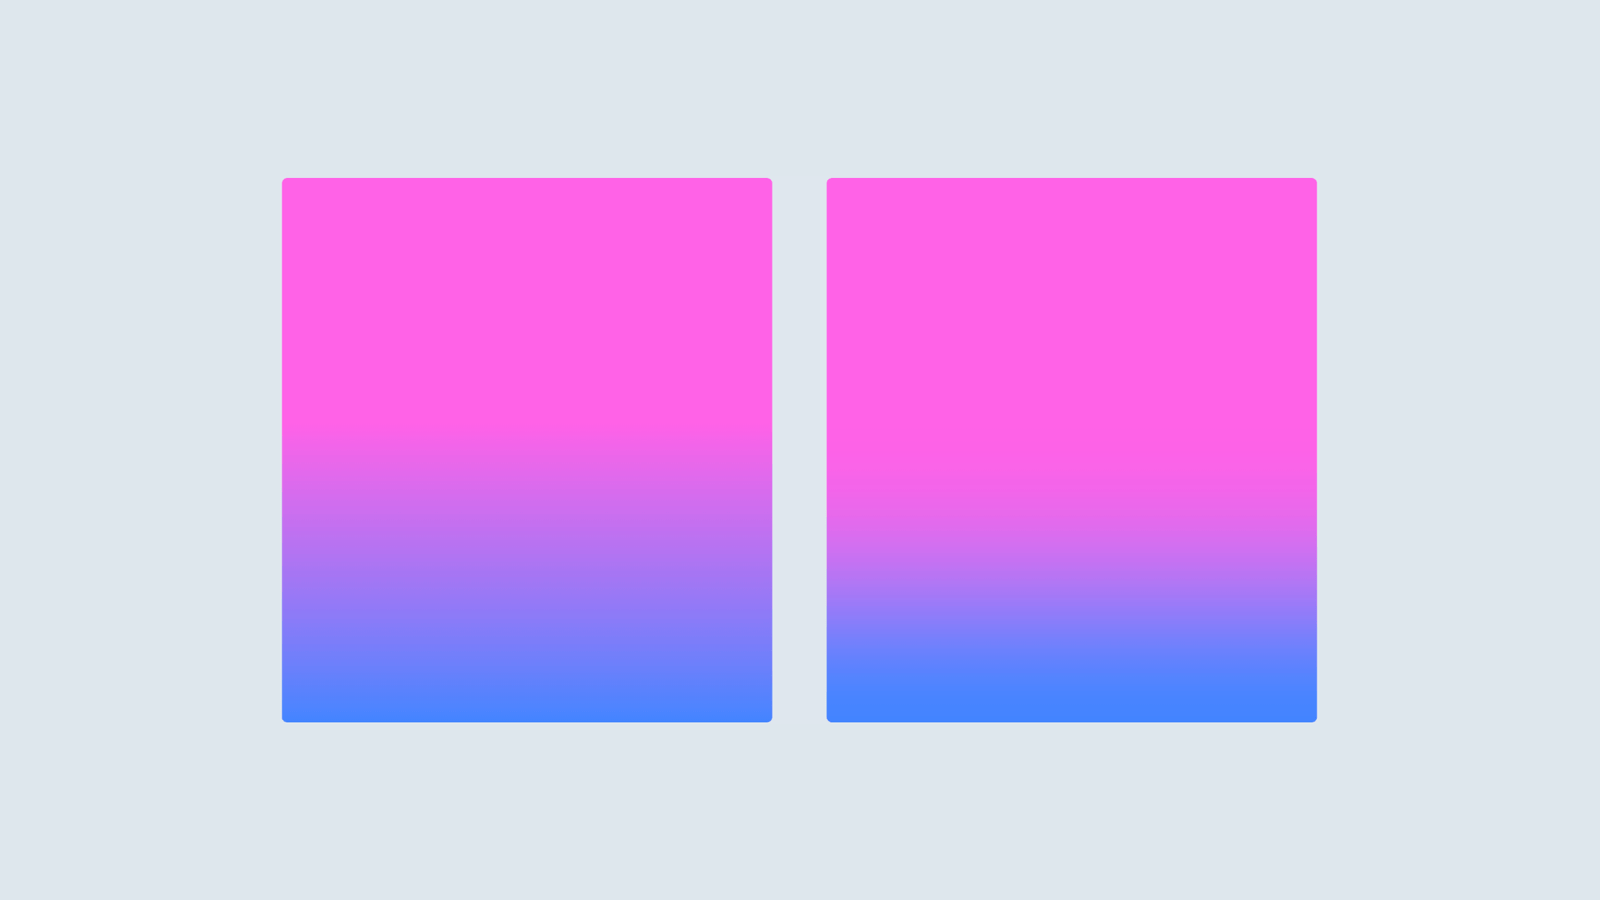 A gradient (from pink to blue) without easing on the left, and with easing on the right